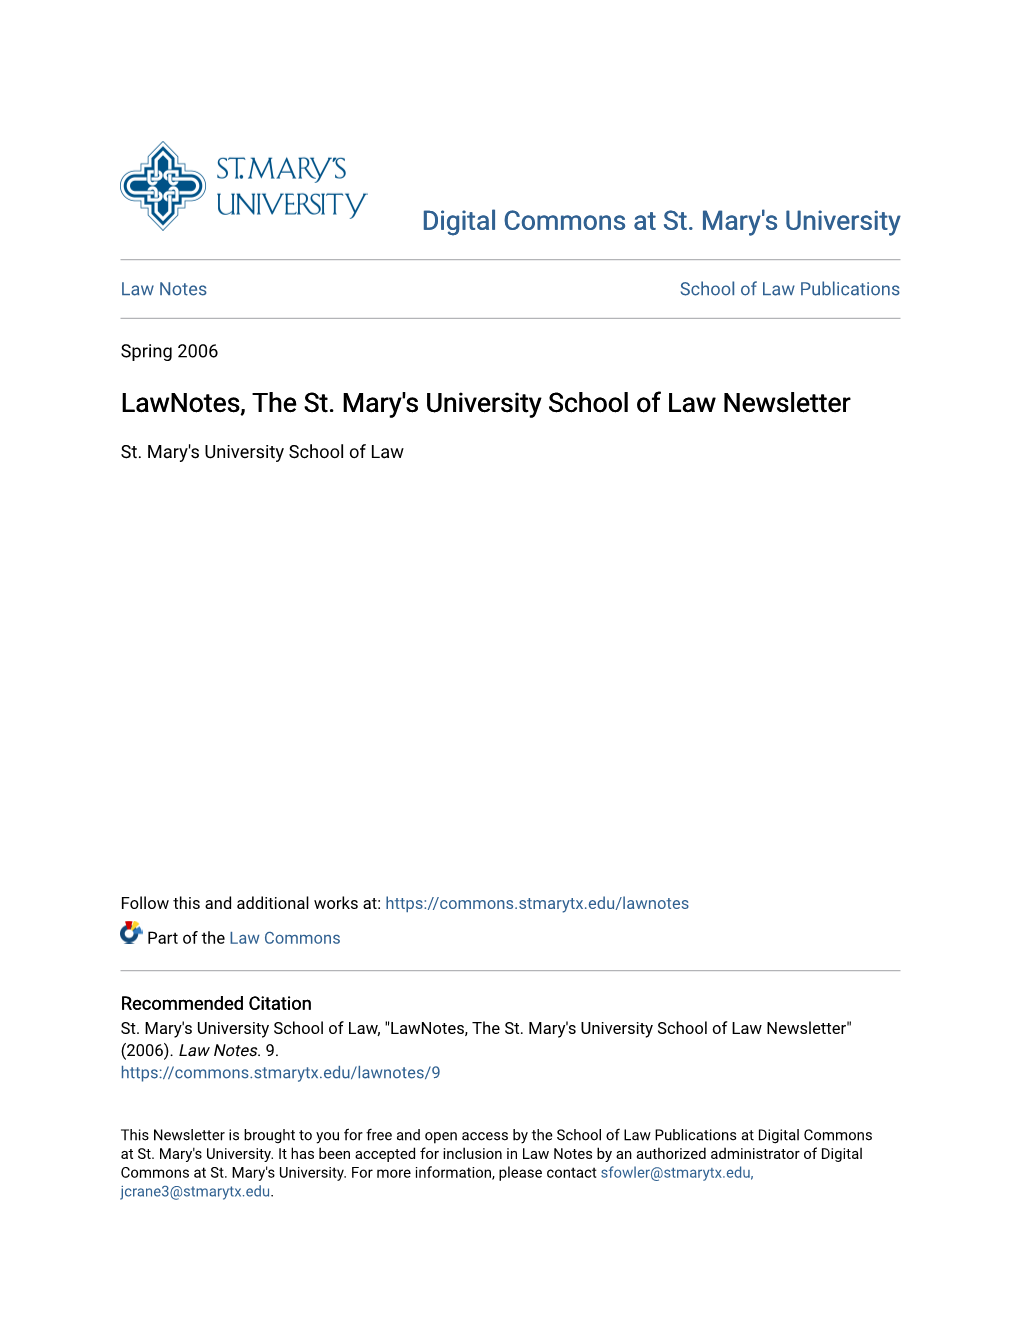 Lawnotes, the St. Mary's University School of Law Newsletter